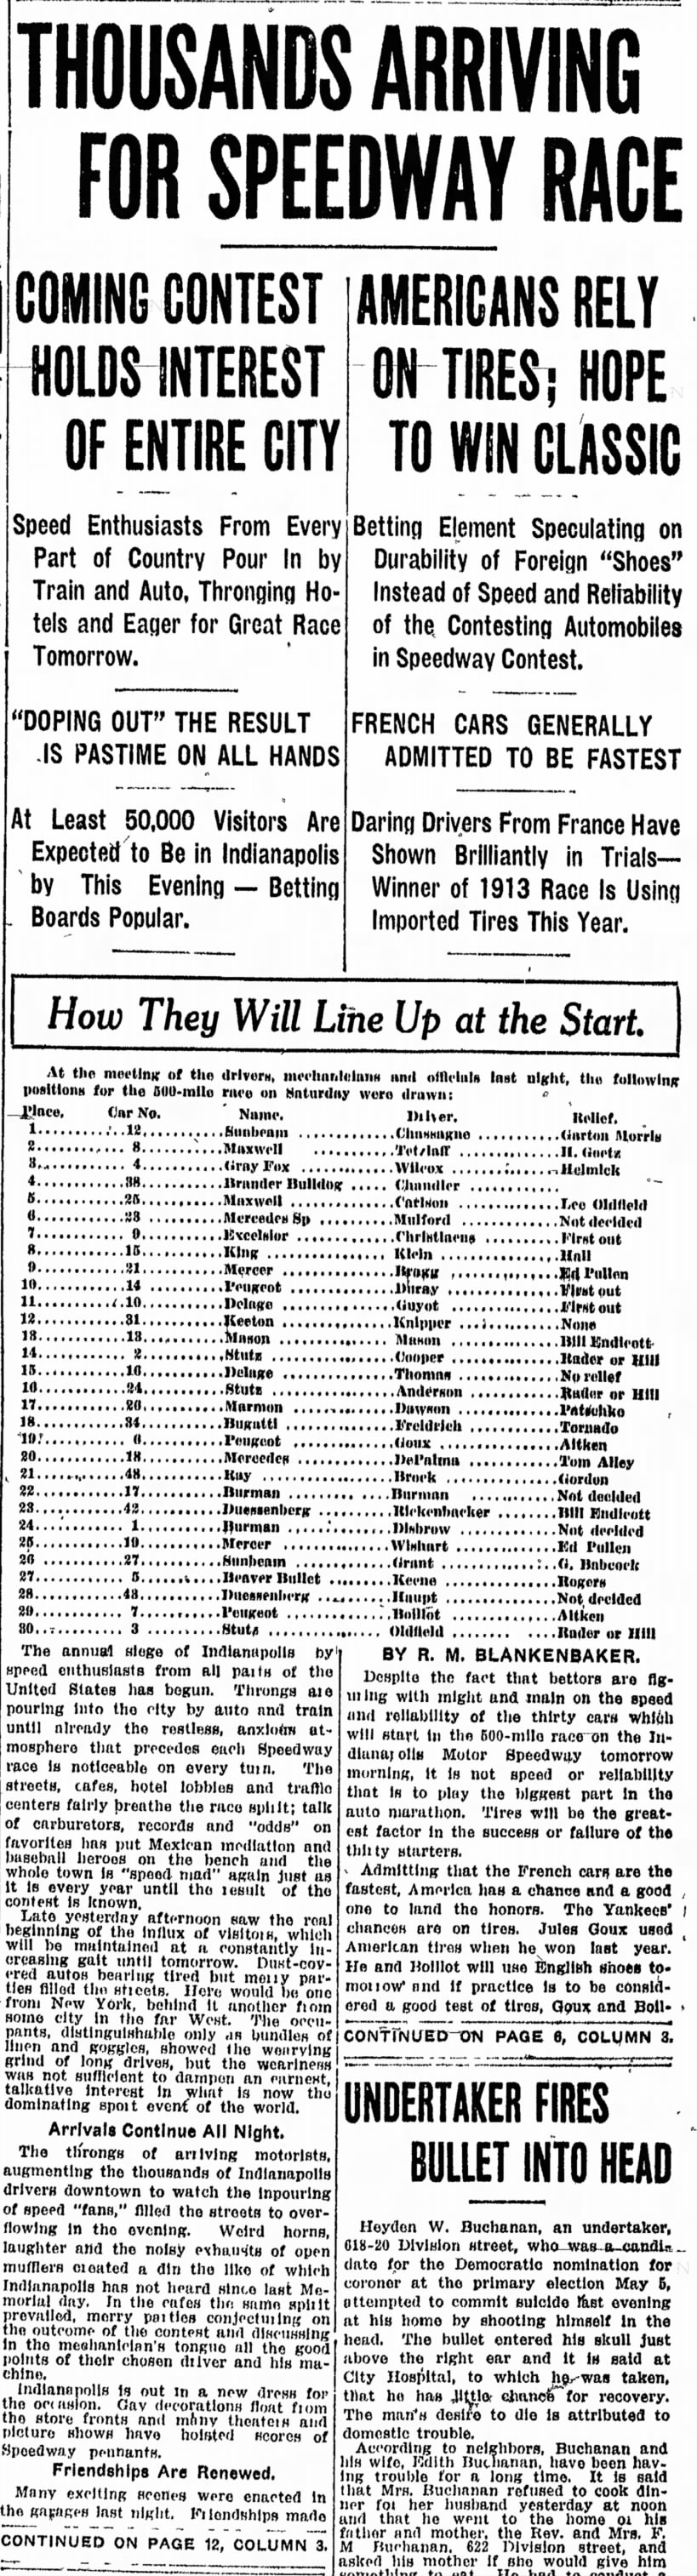 1914 Indy 500 starting positions